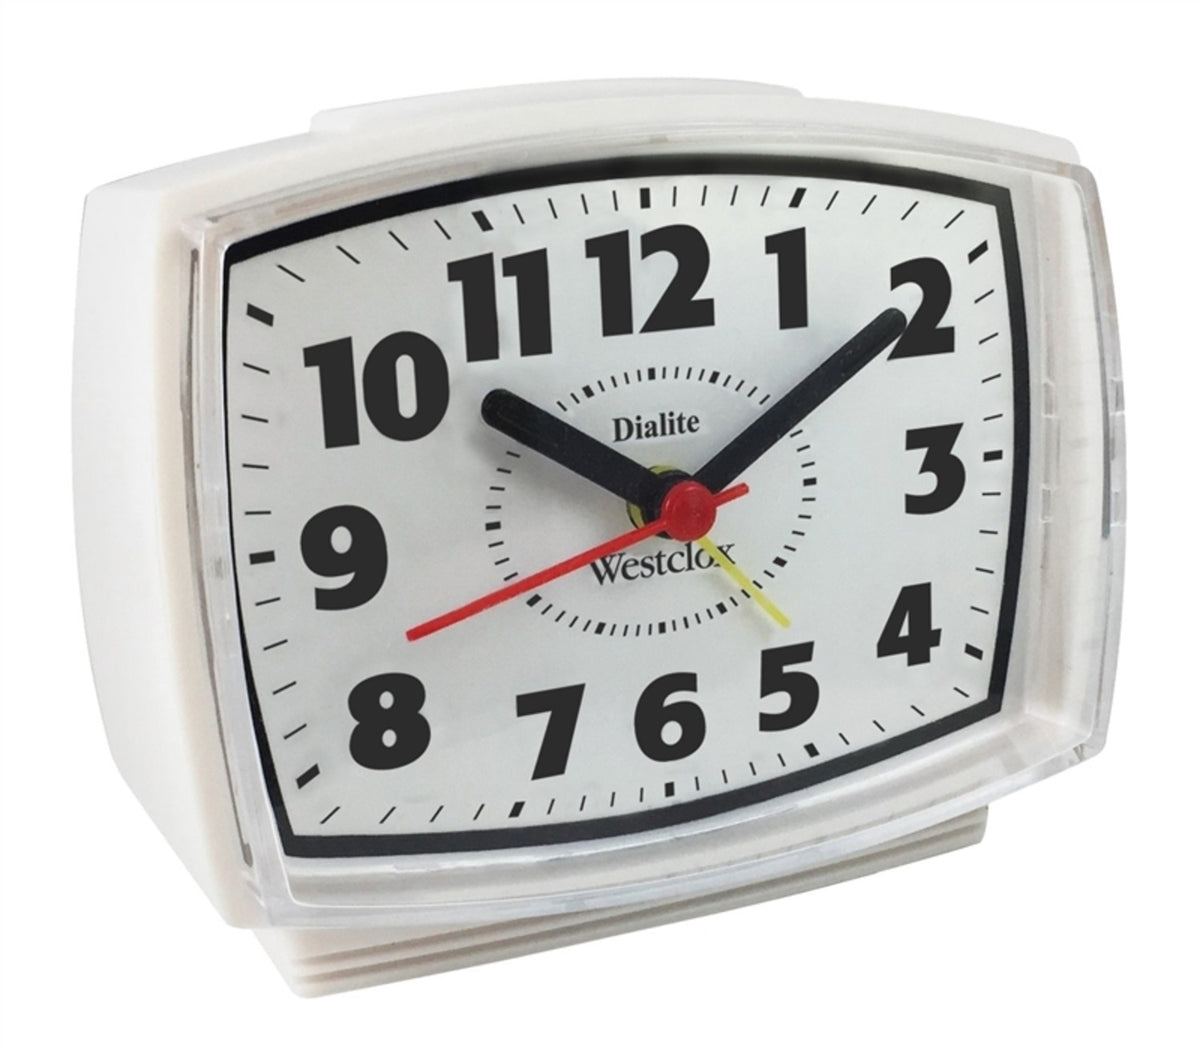 Buy westclox 22192 - Online store for clocks & timers, alarm in USA, on sale, low price, discount deals, coupon code